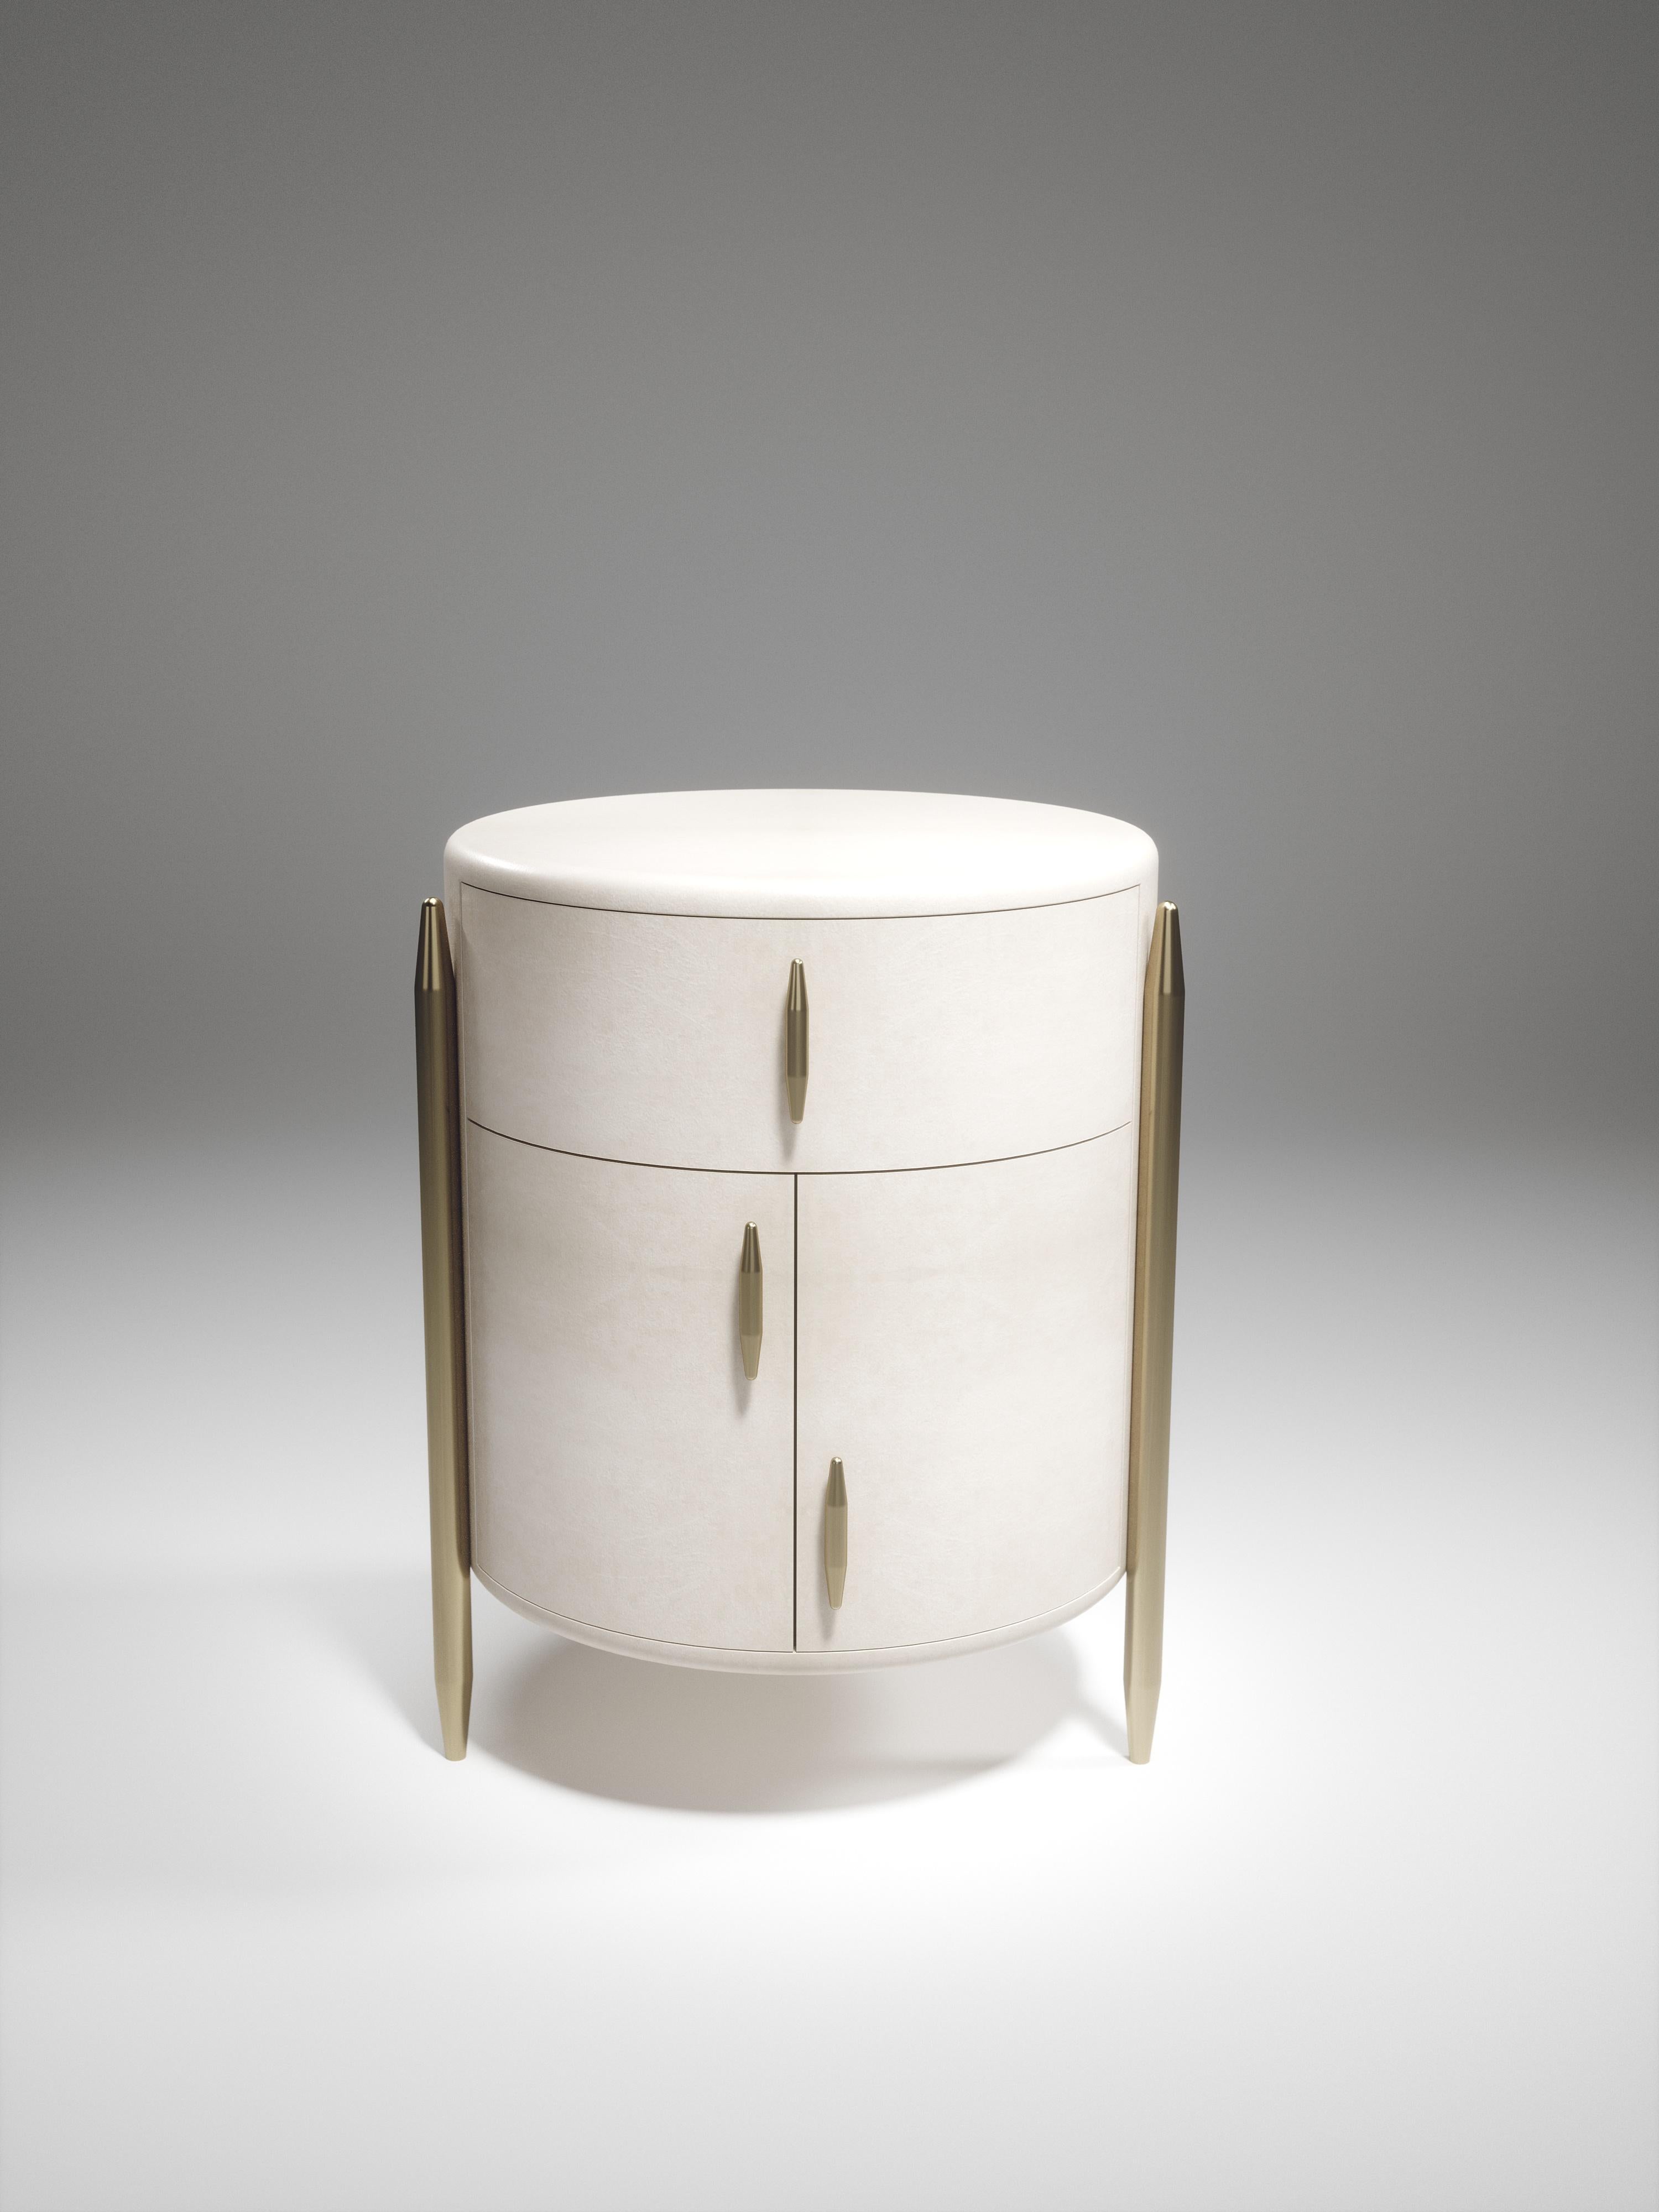 The pair of Dandy round bedside table by Kifu Paris is an elegant and a luxurious home accent, inlaid in cream parchment with bronze-patina brass details. This piece includes 1 drawer total and a cabinet below; the interiors are inlaid in gemelina